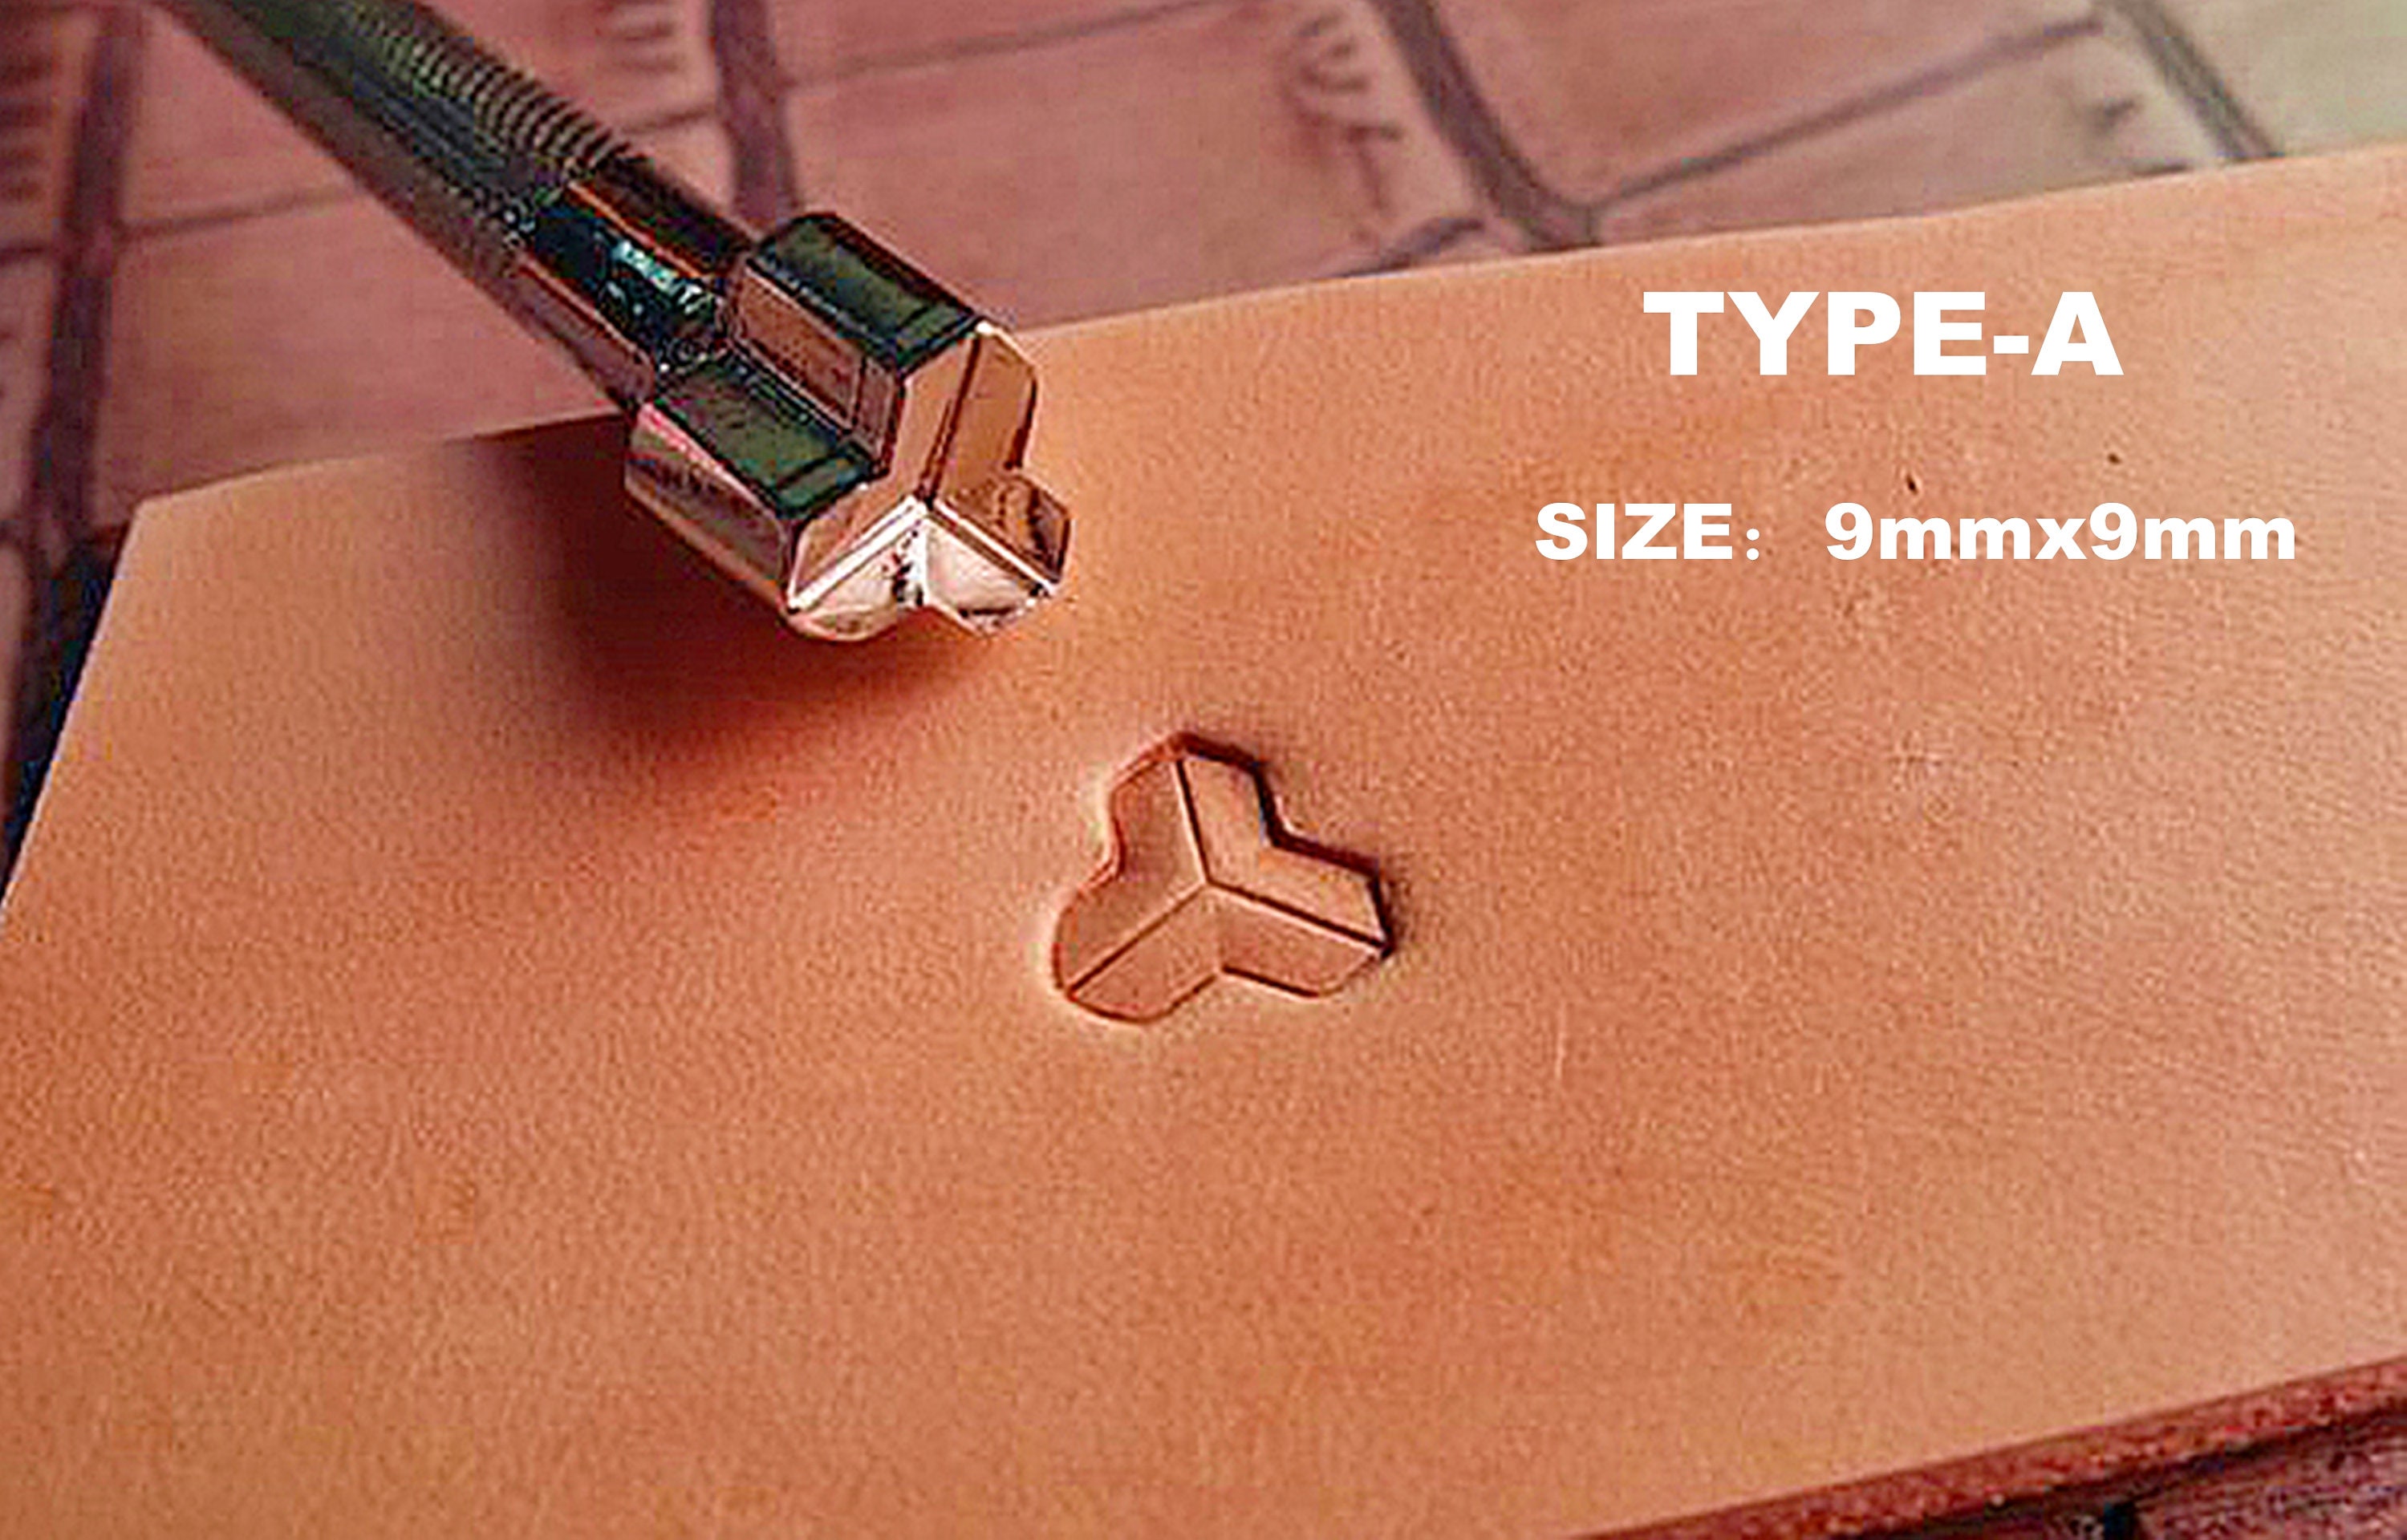  Miokycl Leather Cutting Mat Stamping Board Punching Craft Pad  DIY Tool Supplies Accessories : Arts, Crafts & Sewing